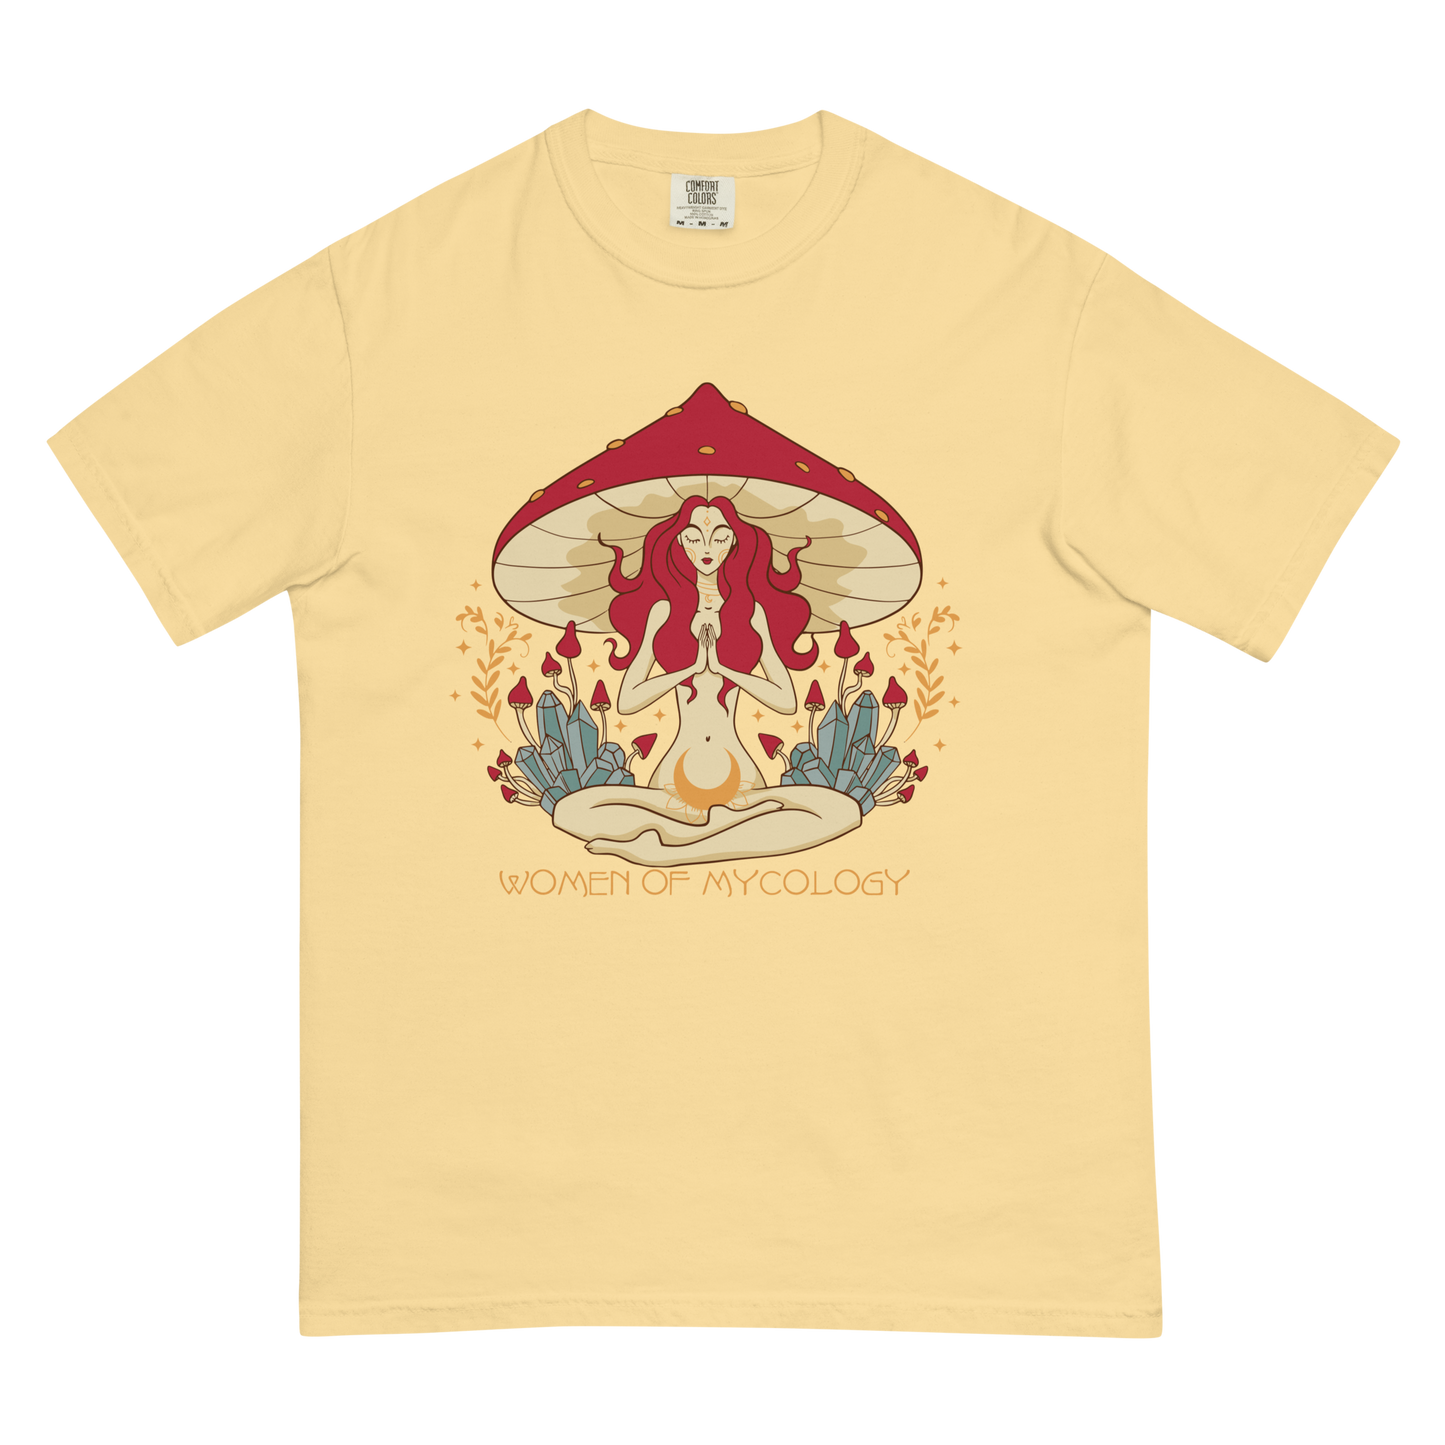 Mystical Woman of Mycology Premium Graphic Tee